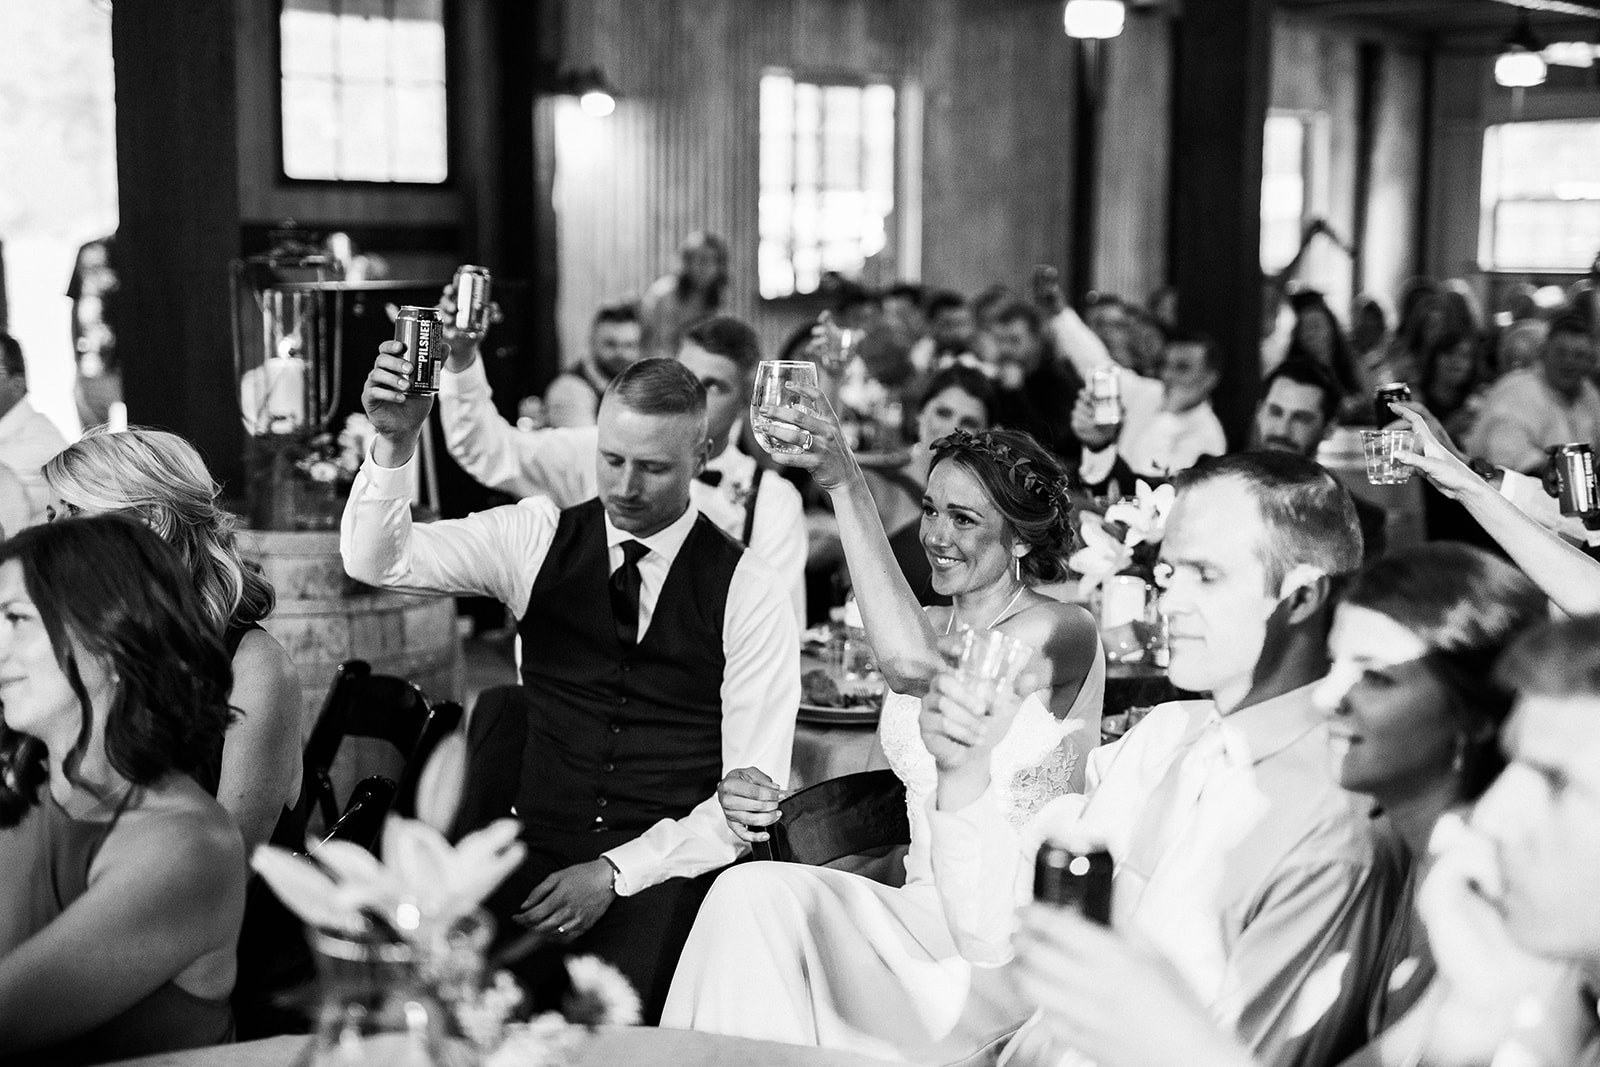 the crowd saluting the bride and groom